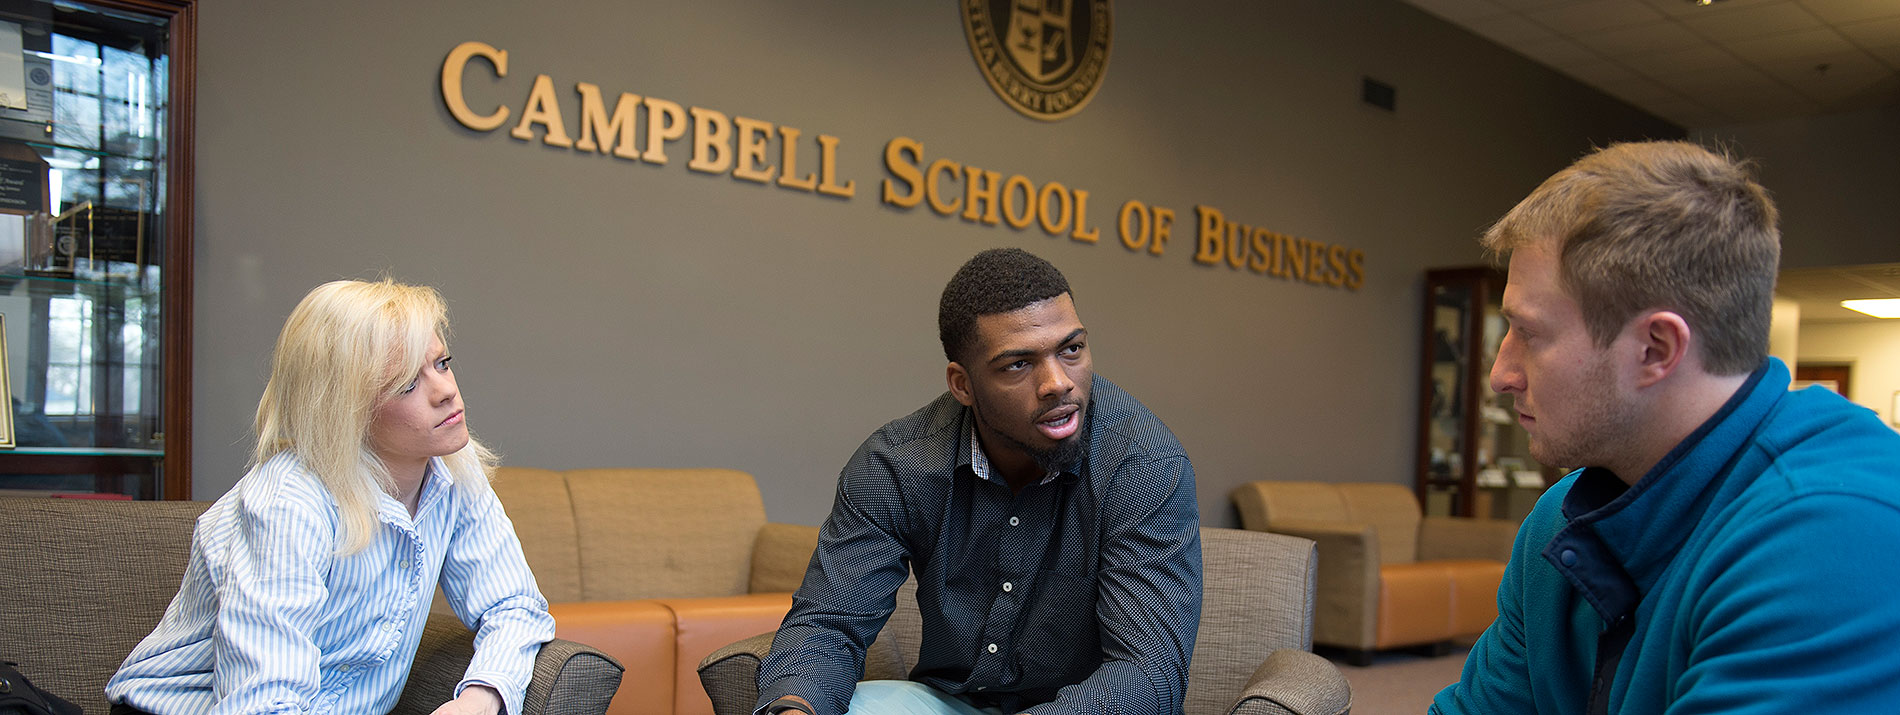 Graduate students working in the Campbell School of Business